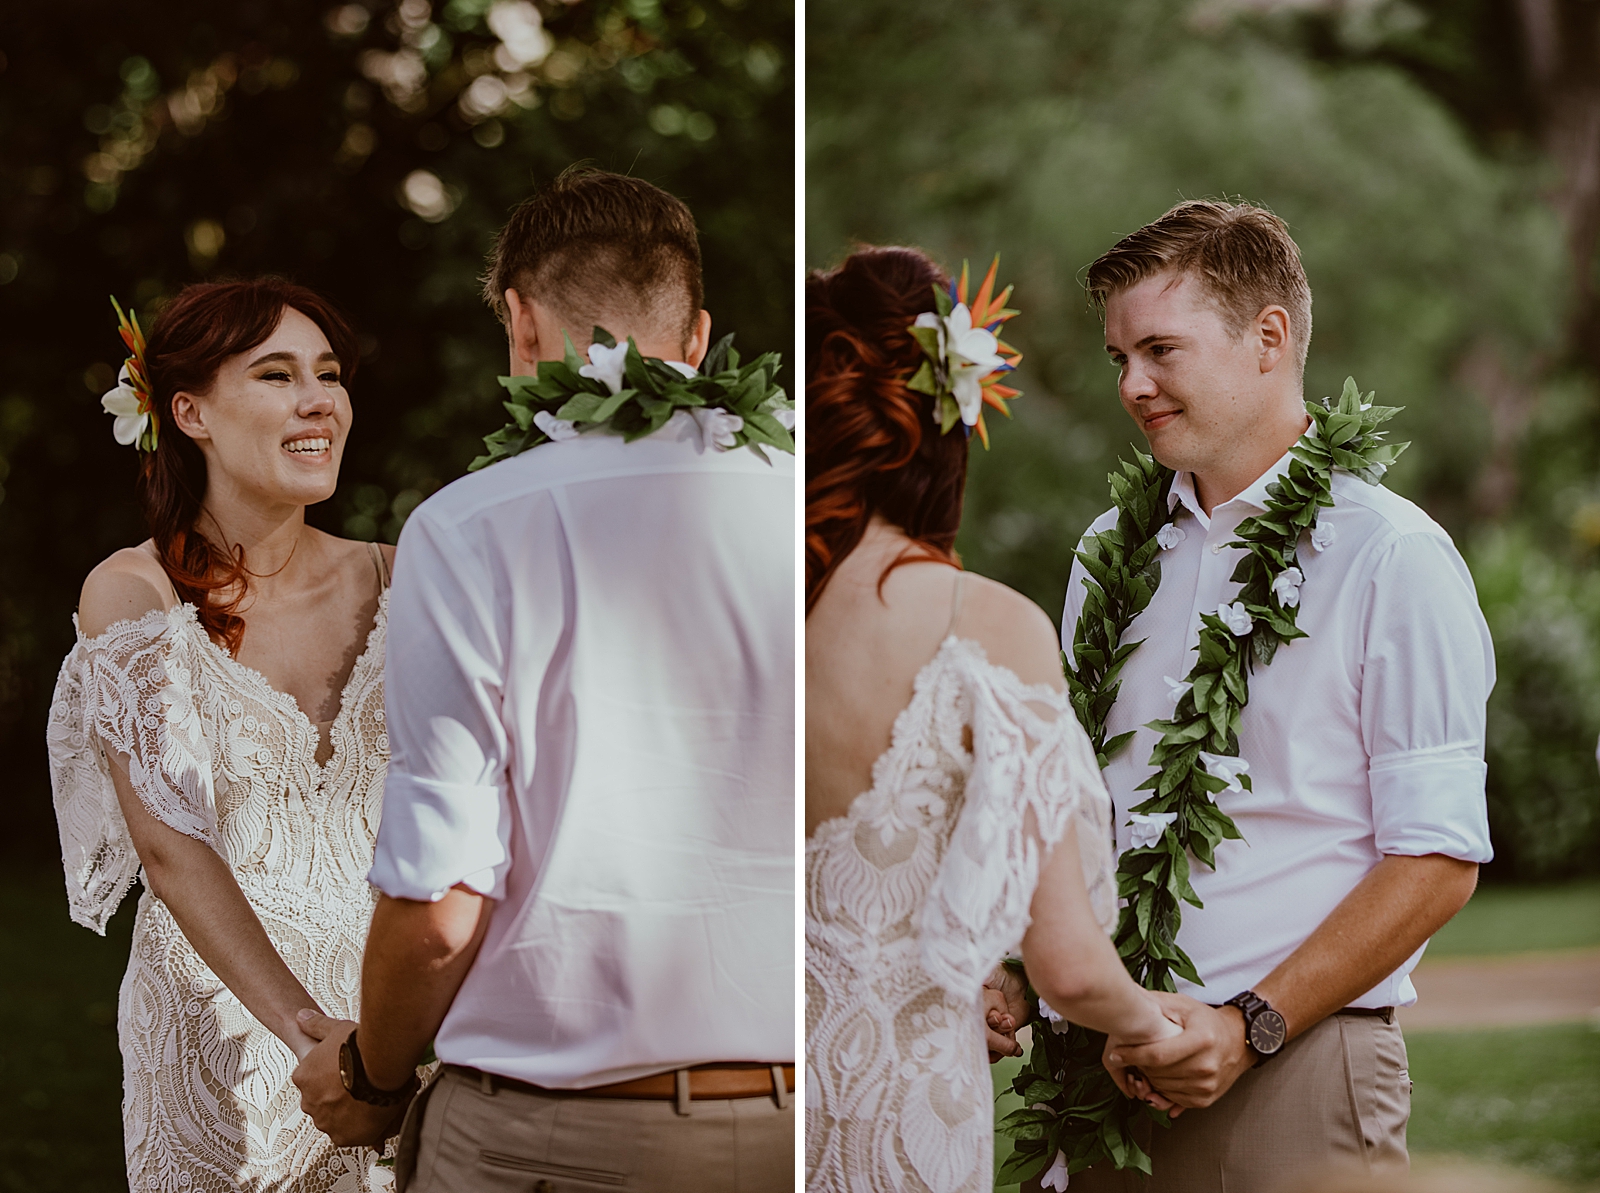 Portrait shots of Bride and Groom looking at each other during Ceremony